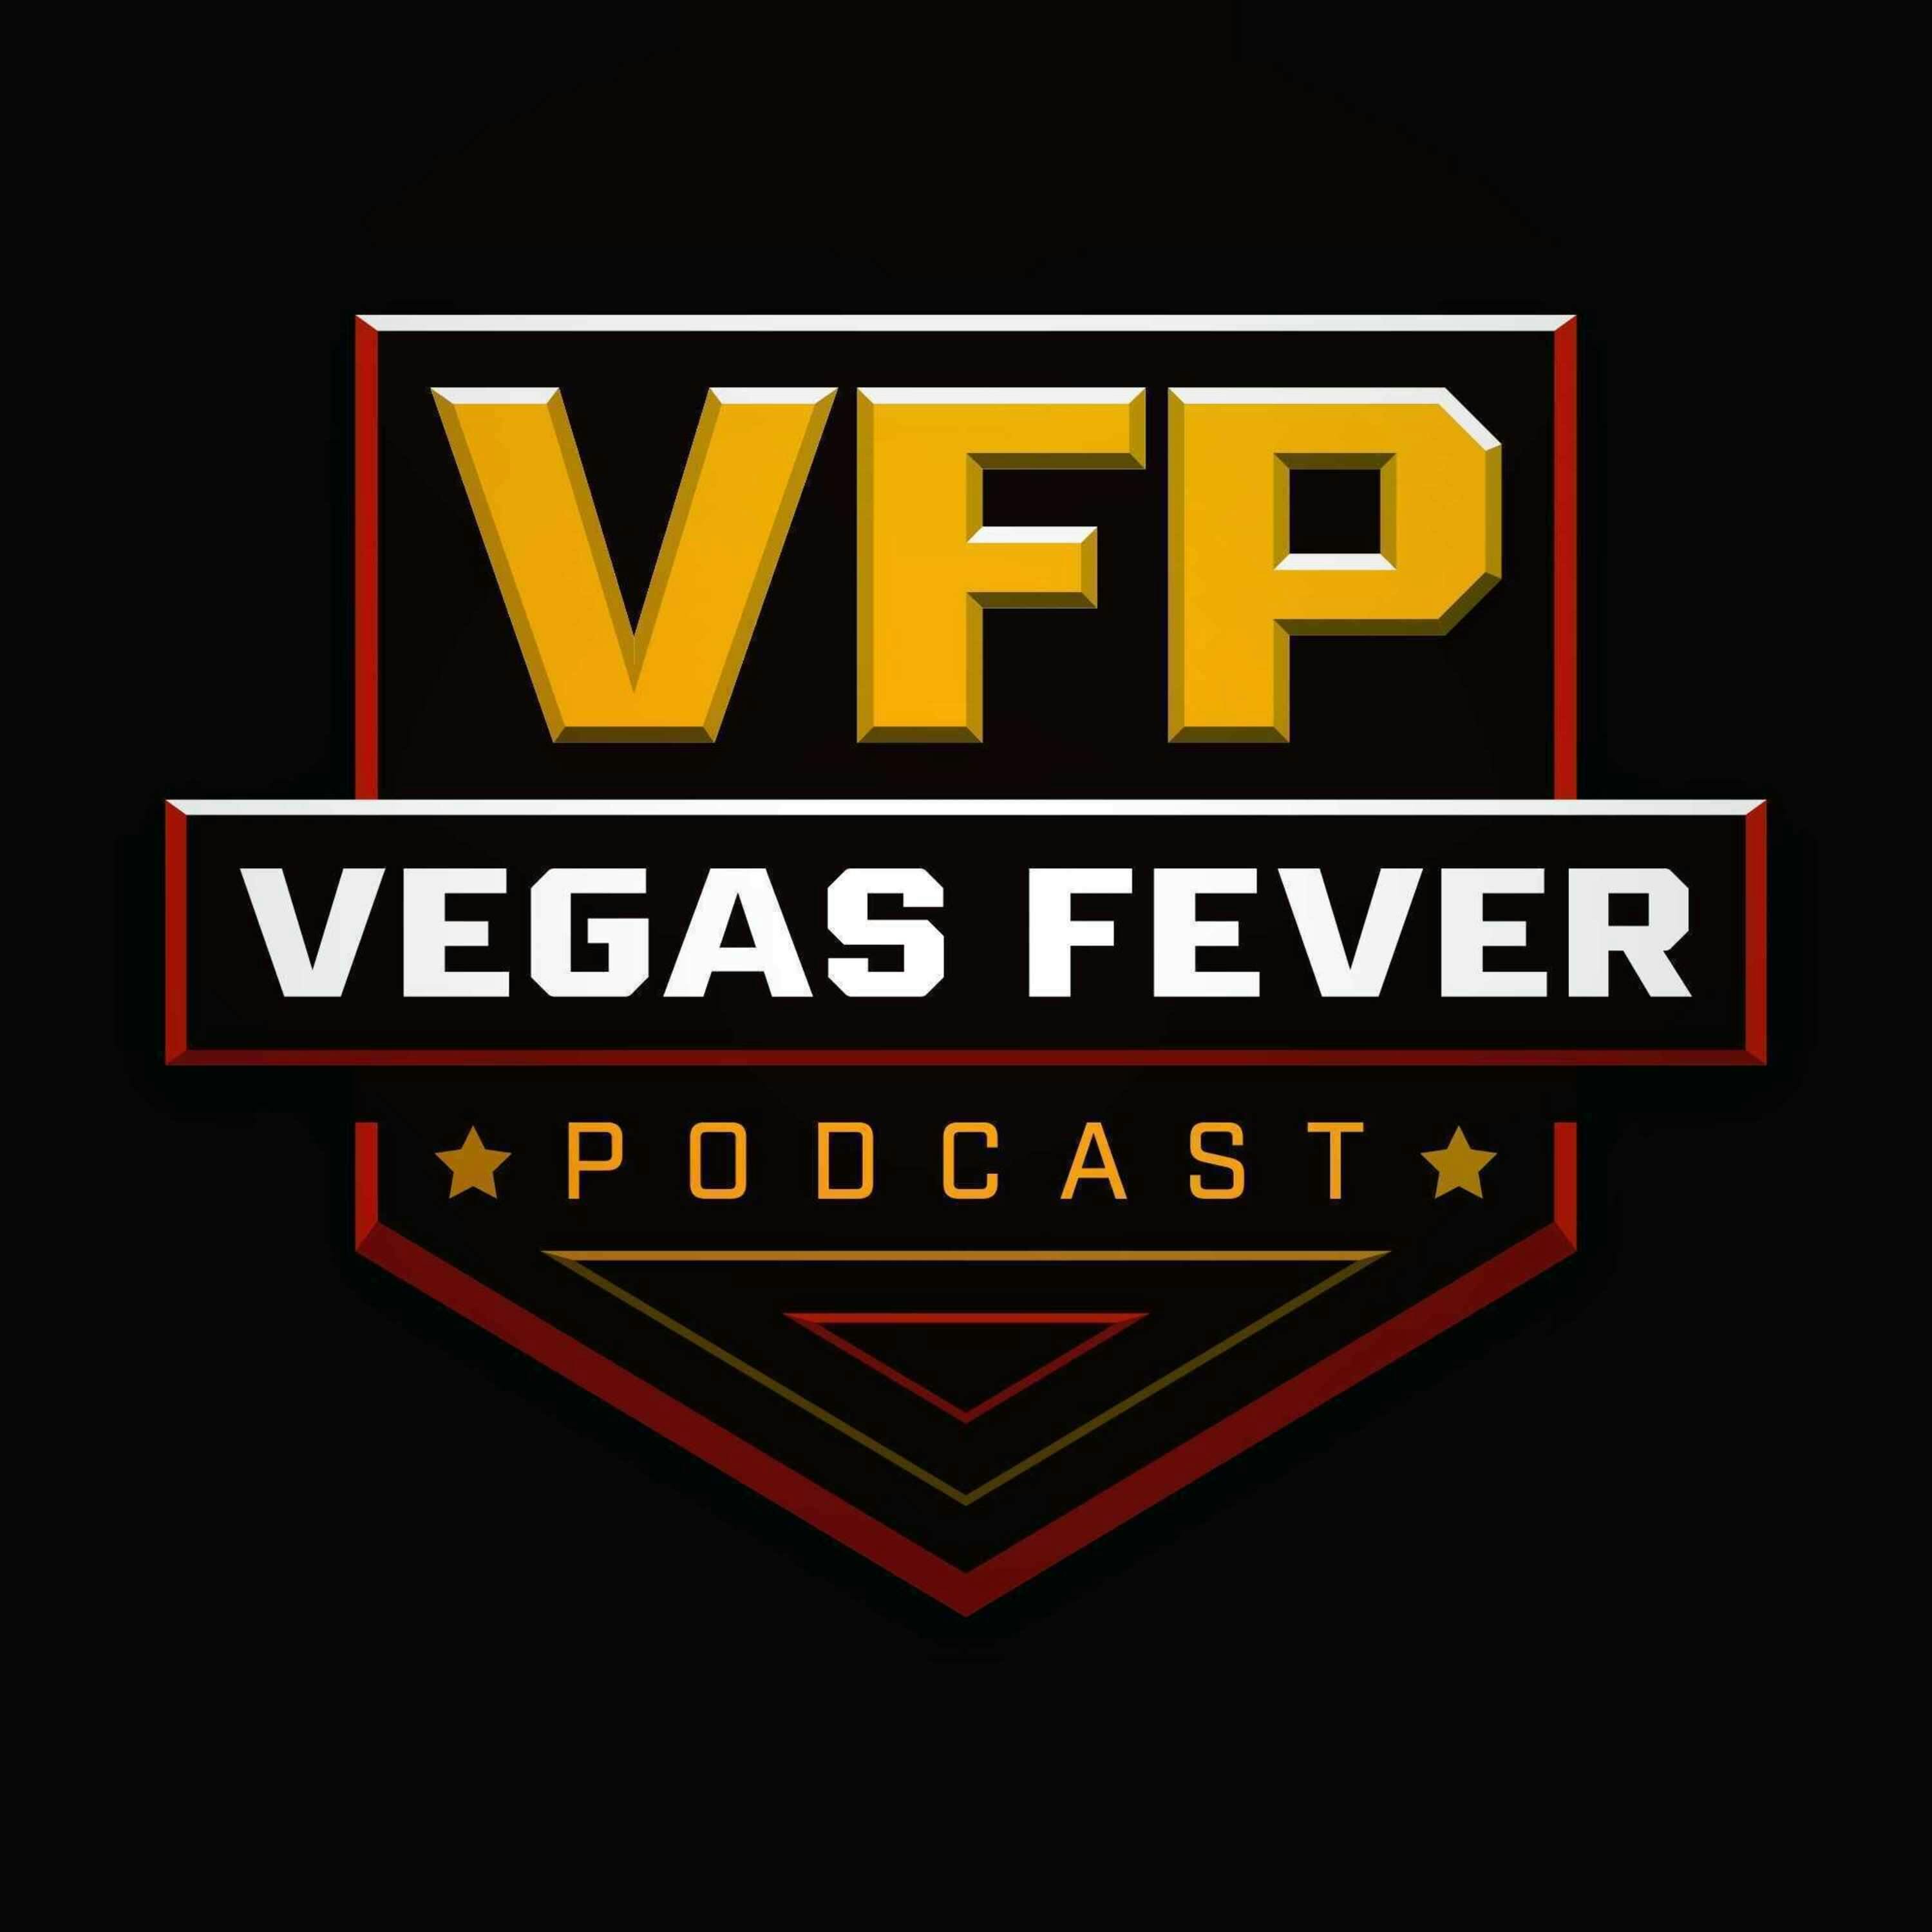 Episode 18- We talk UNLV's player additions & subtractions, VGK adds a player at the trade deadline.